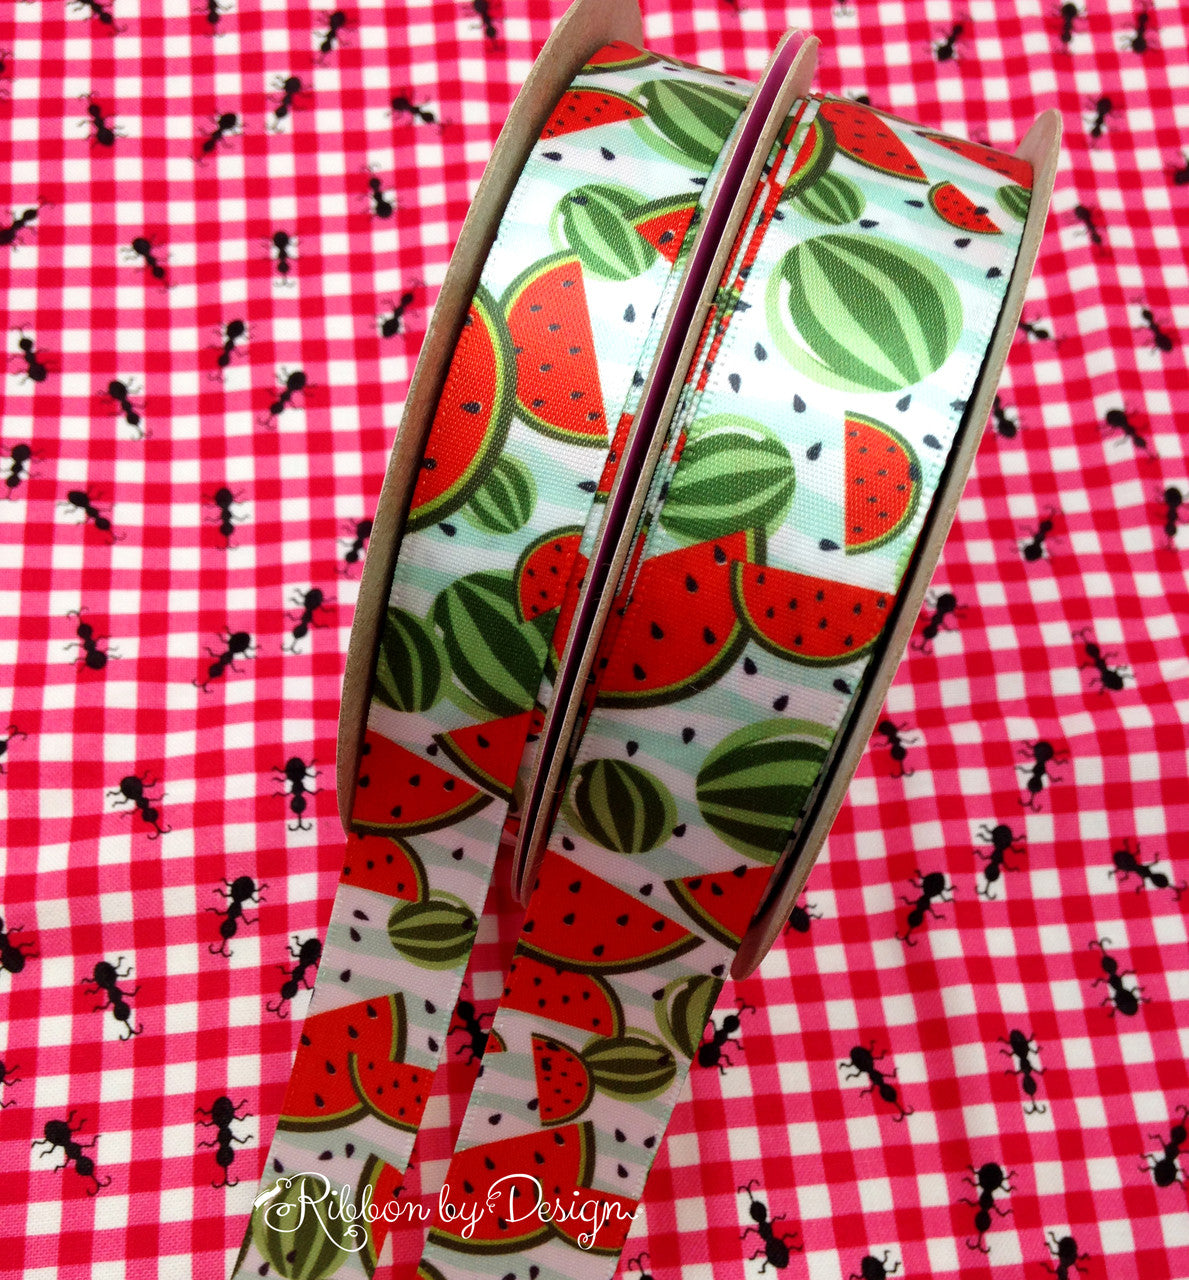 Our yummy Summer watermelons come in two sizes! Offered in 5/8" and 7/8" these watermelon ribbons will be the perfect addition to your picnic themed party!